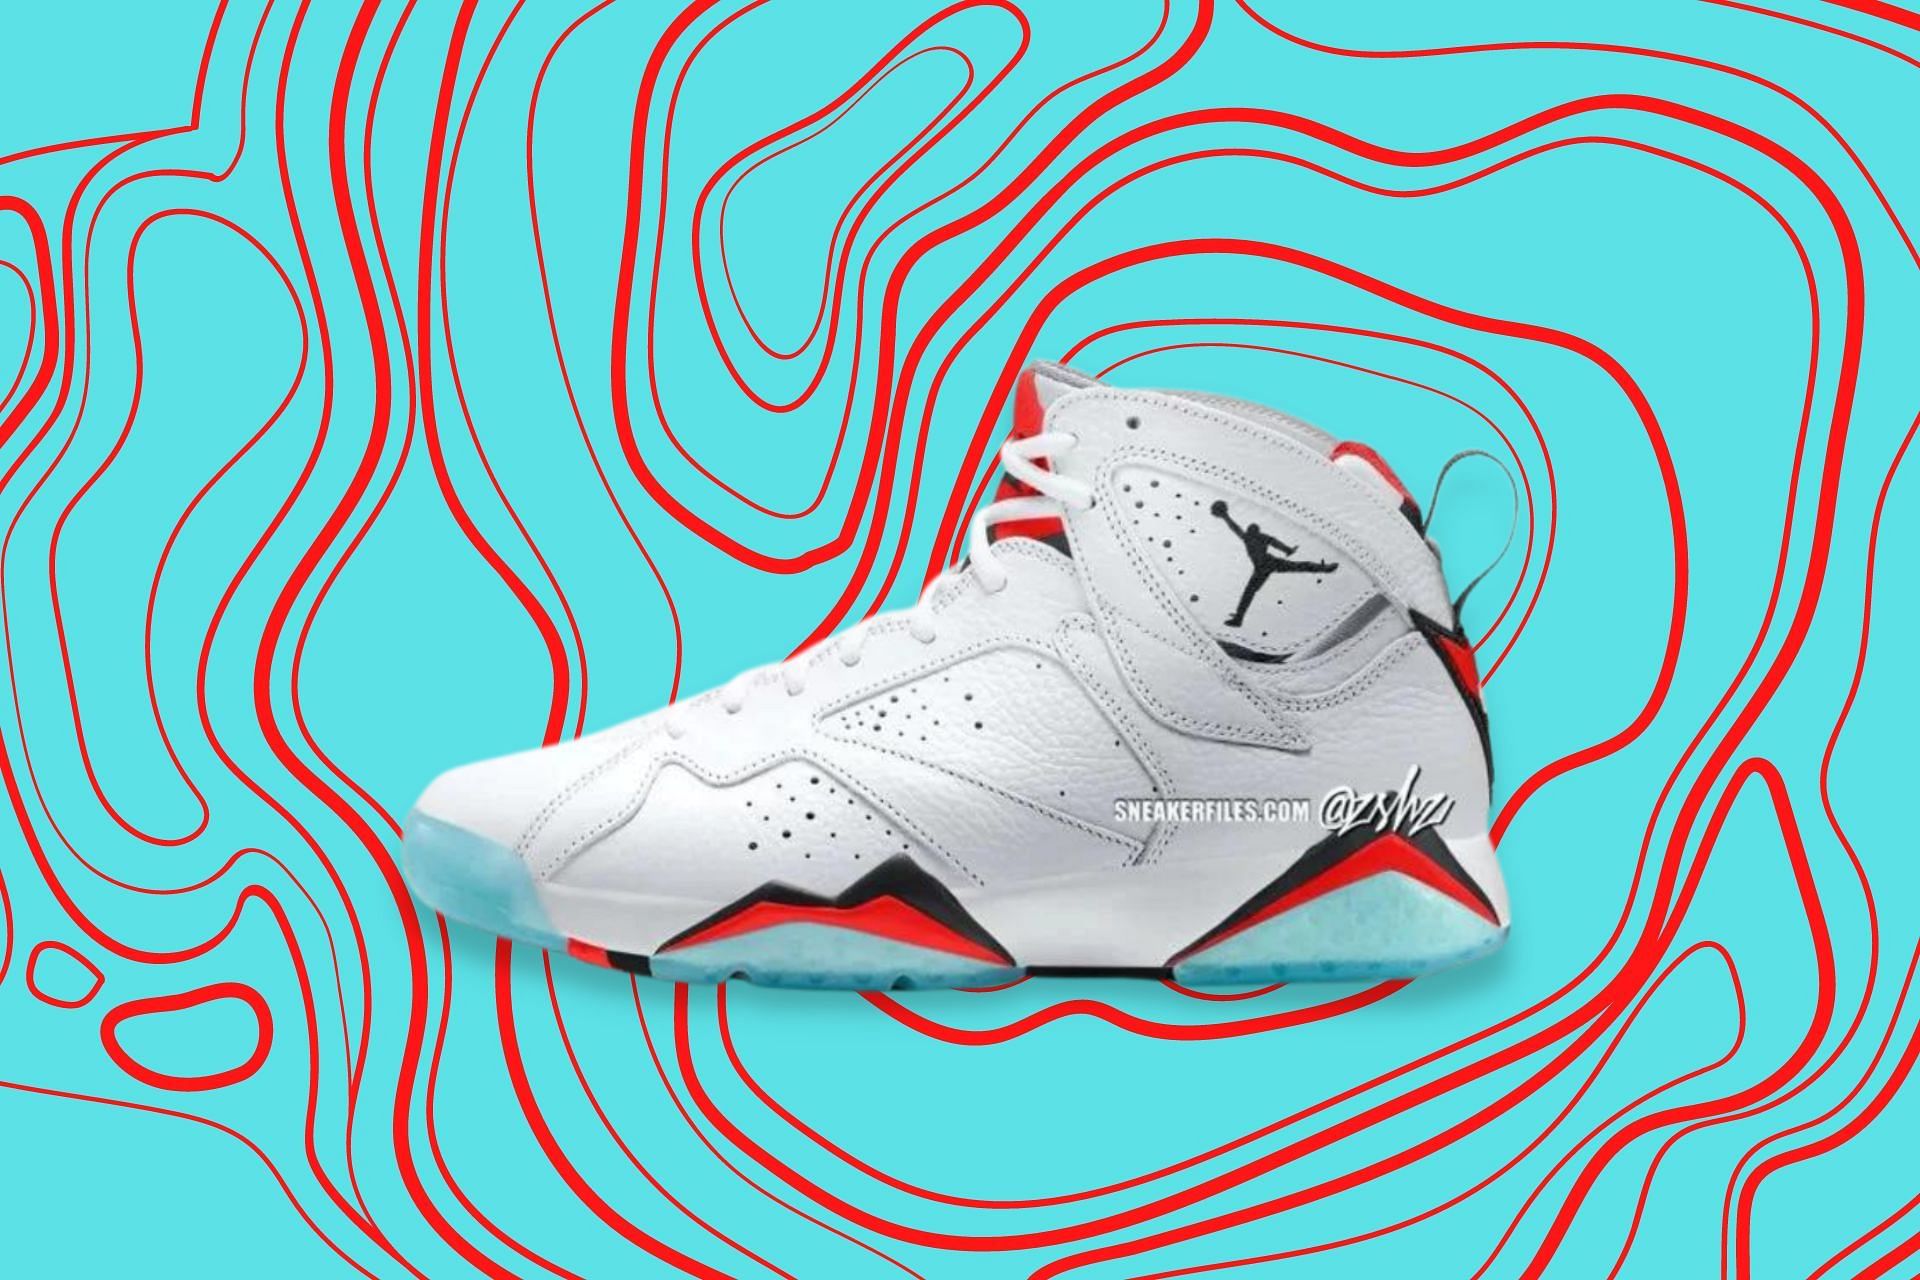 Where to buy Air Jordan 7 "White Infrared" shoes? Price, release date